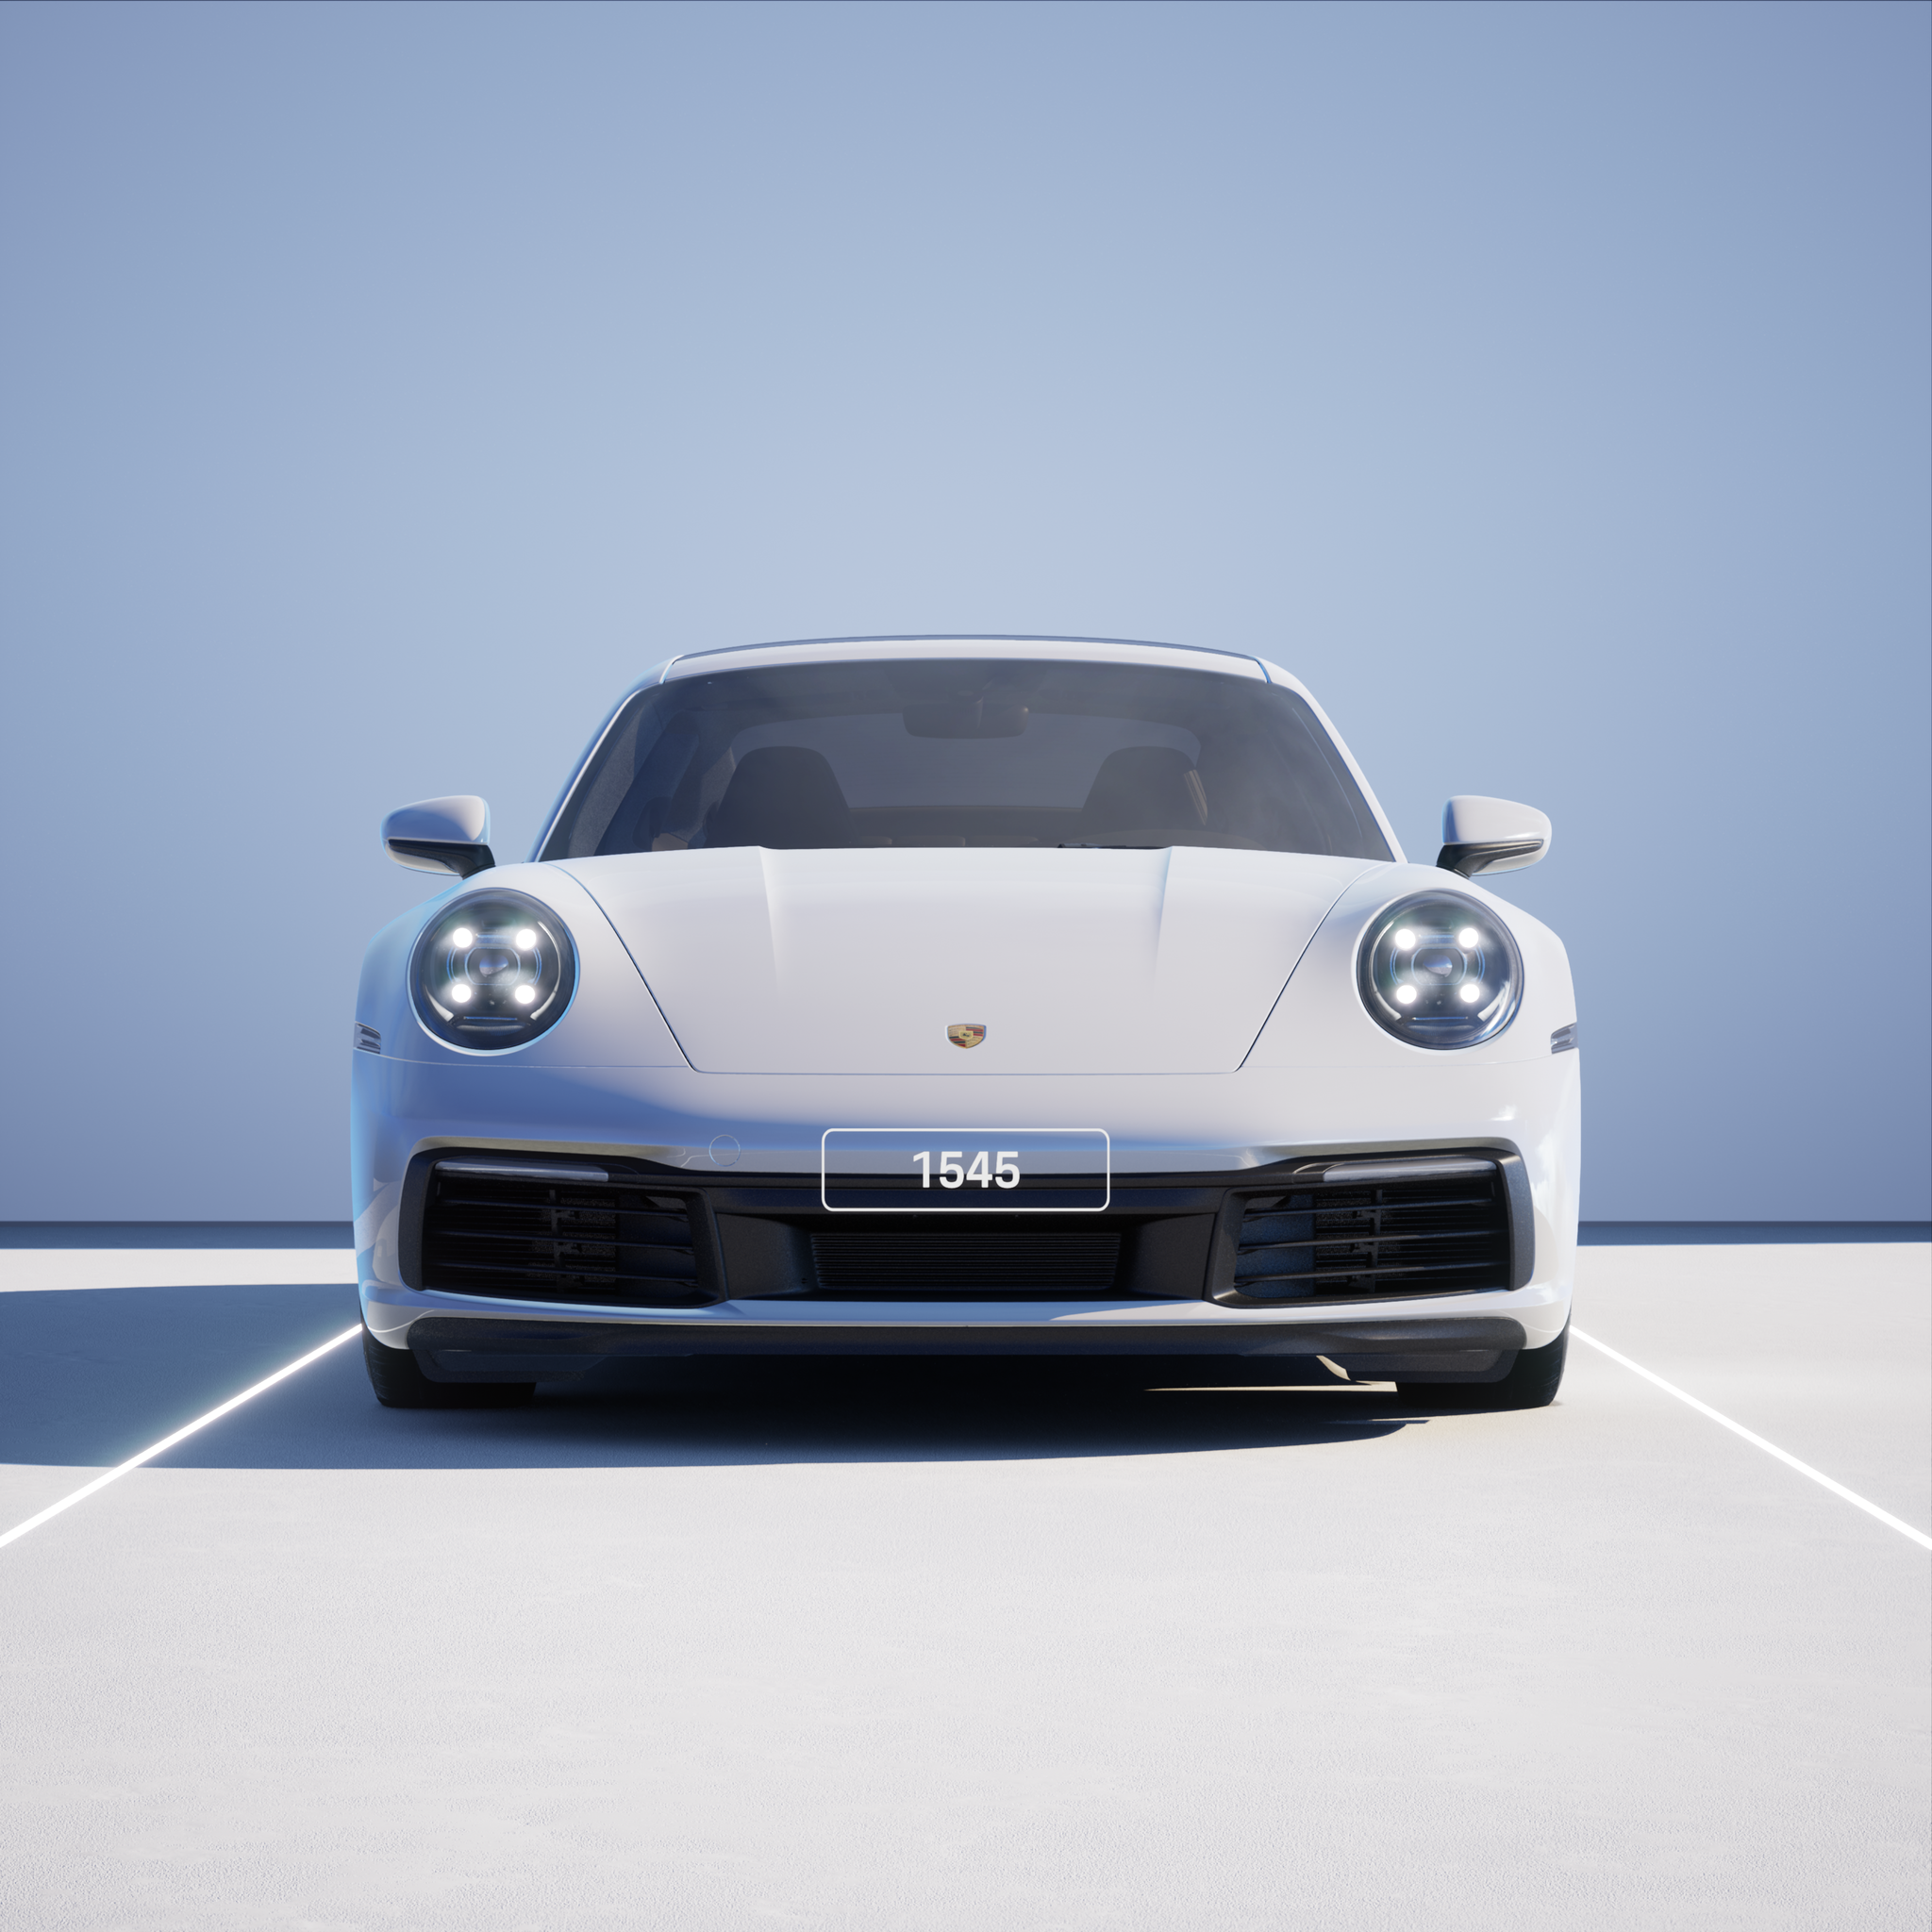 The PORSCHΞ 911 1545 image in phase